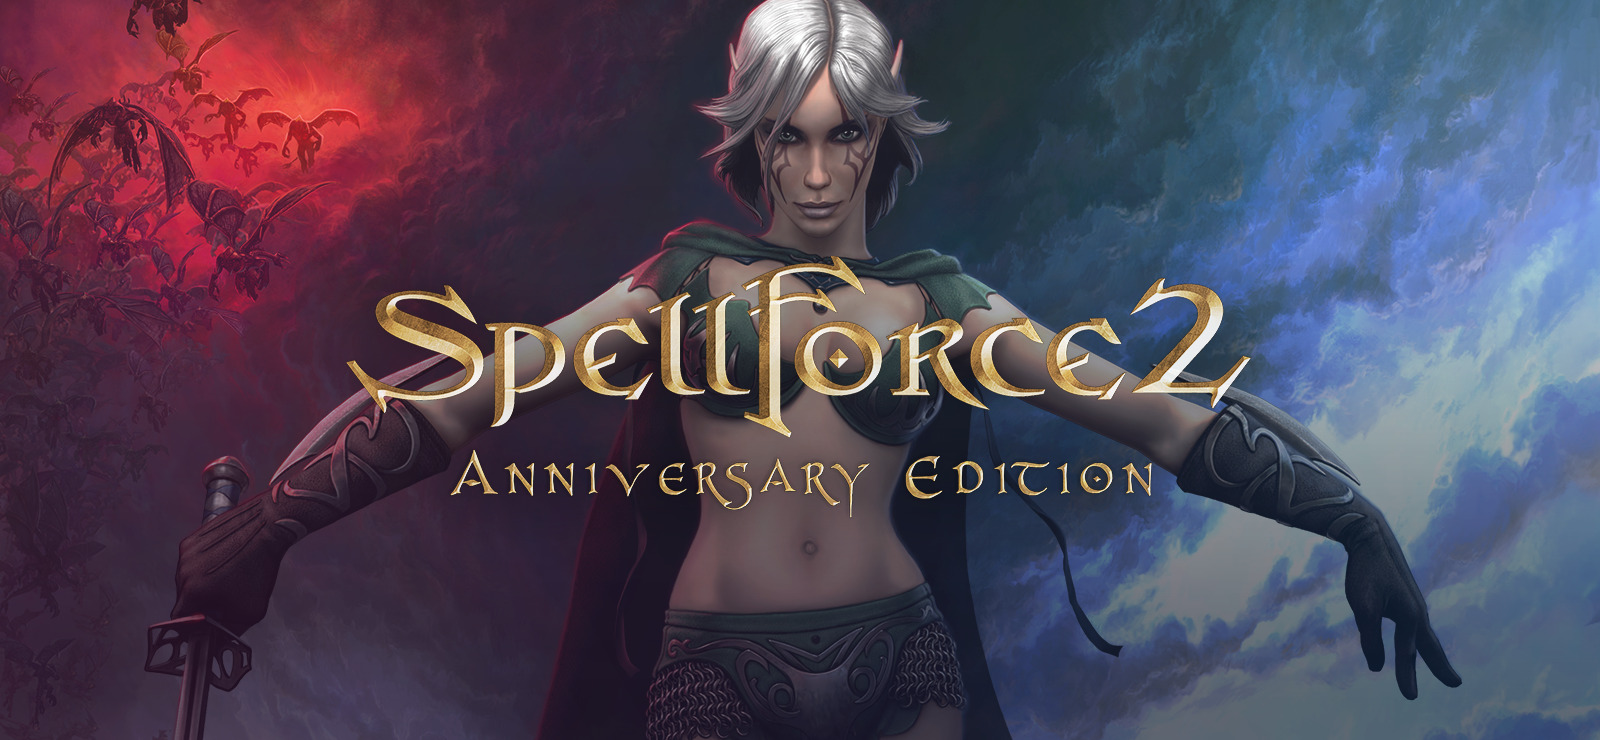 spellforce 2 faith in destiny download free